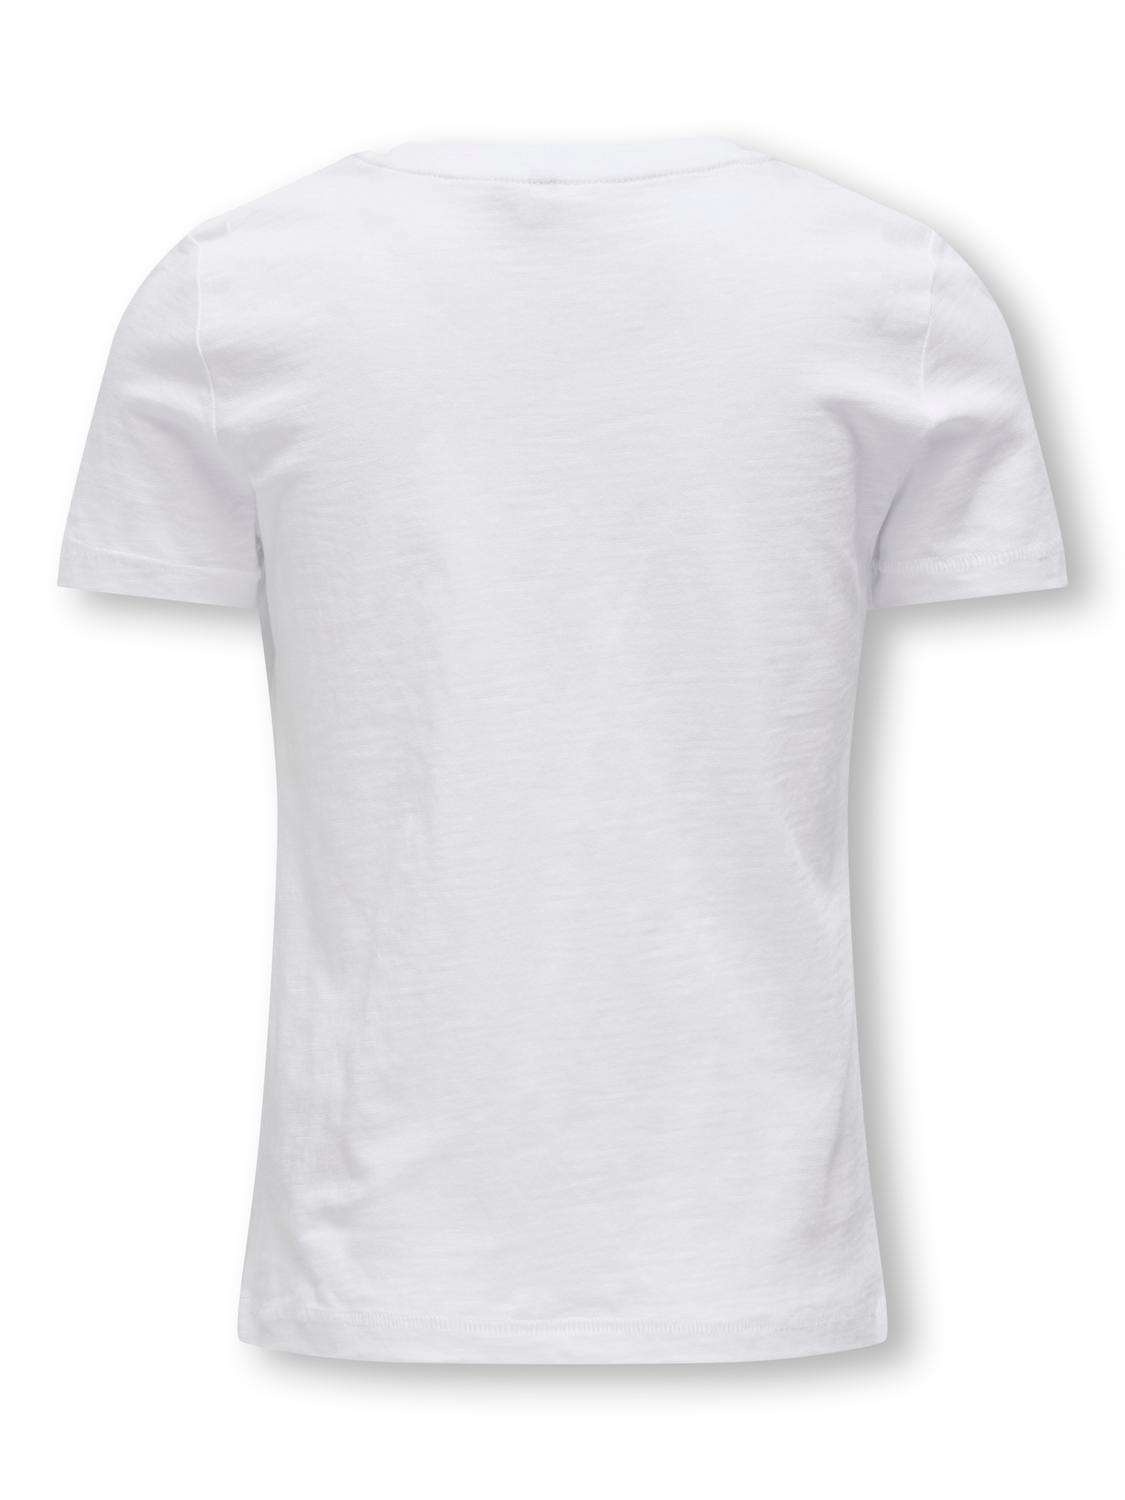 ONLY Regular fit O-hals T-shirts -Bright White - 15317766